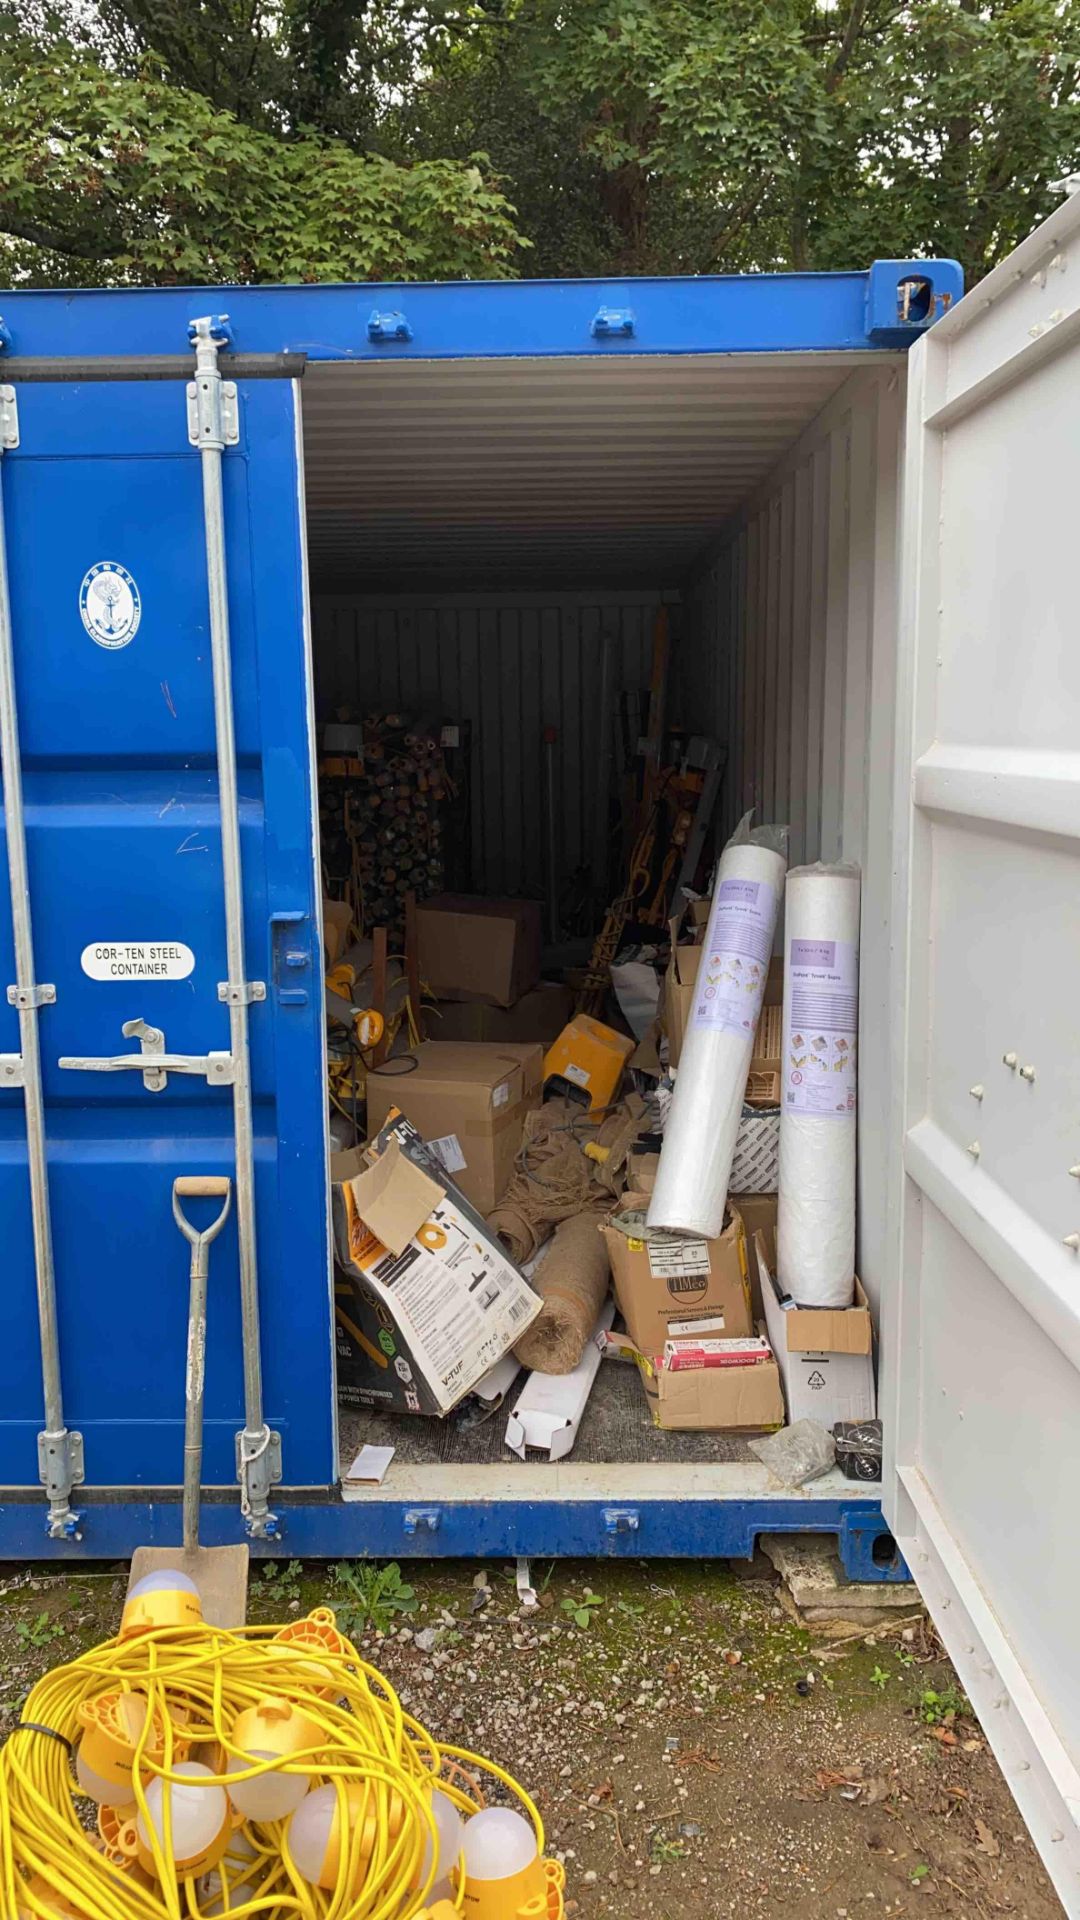 20” steel shipping container excluding contents - please note this item can be collected Monday 23rd - Image 2 of 4